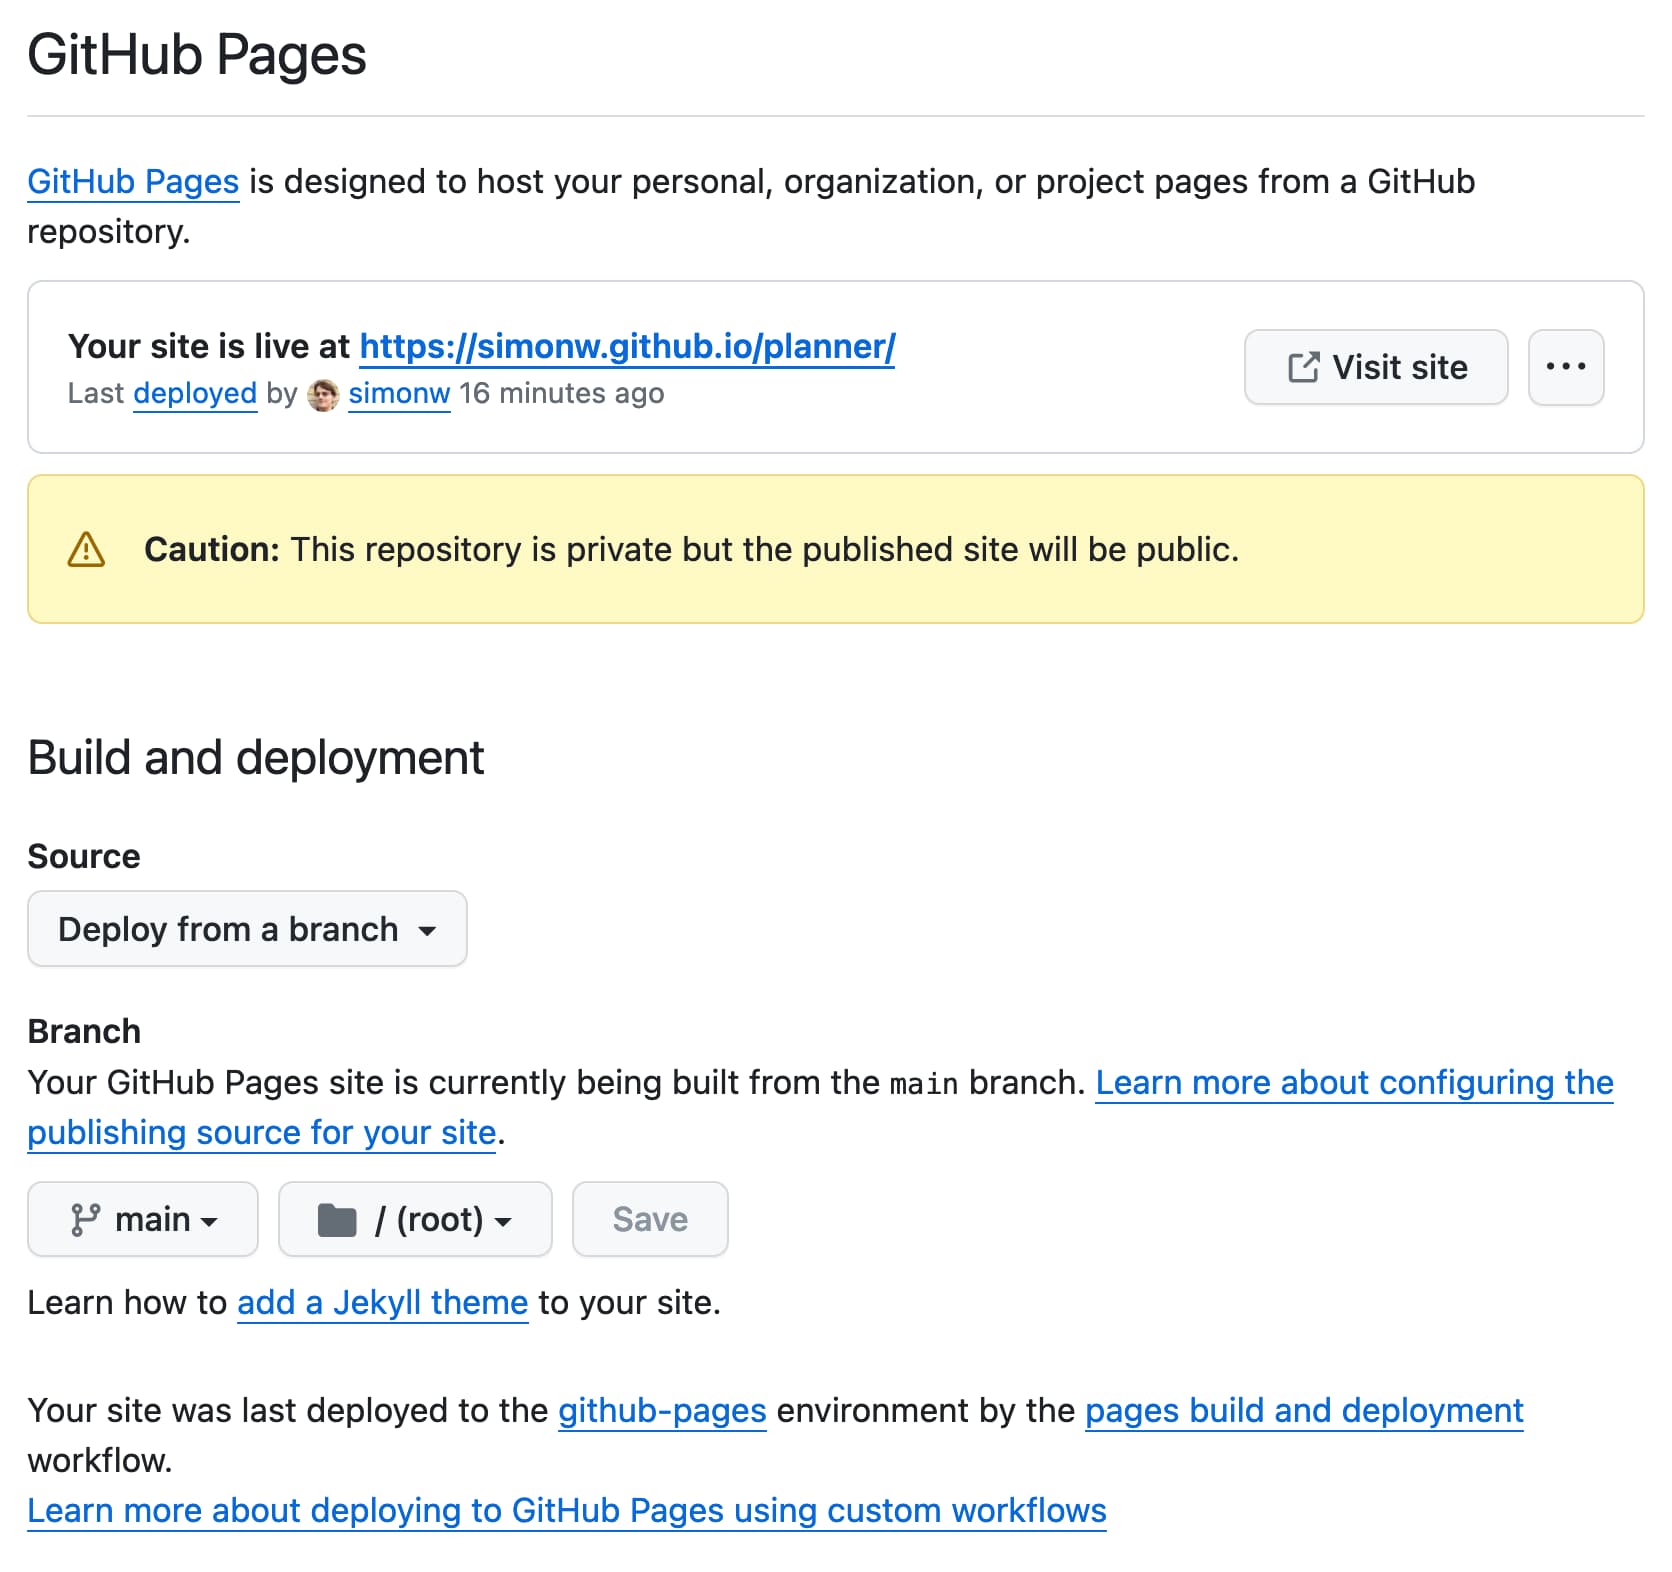 GitHub Pages settings - source is Deploy from a branch, it says my site is now live at simonw.github.io/planner